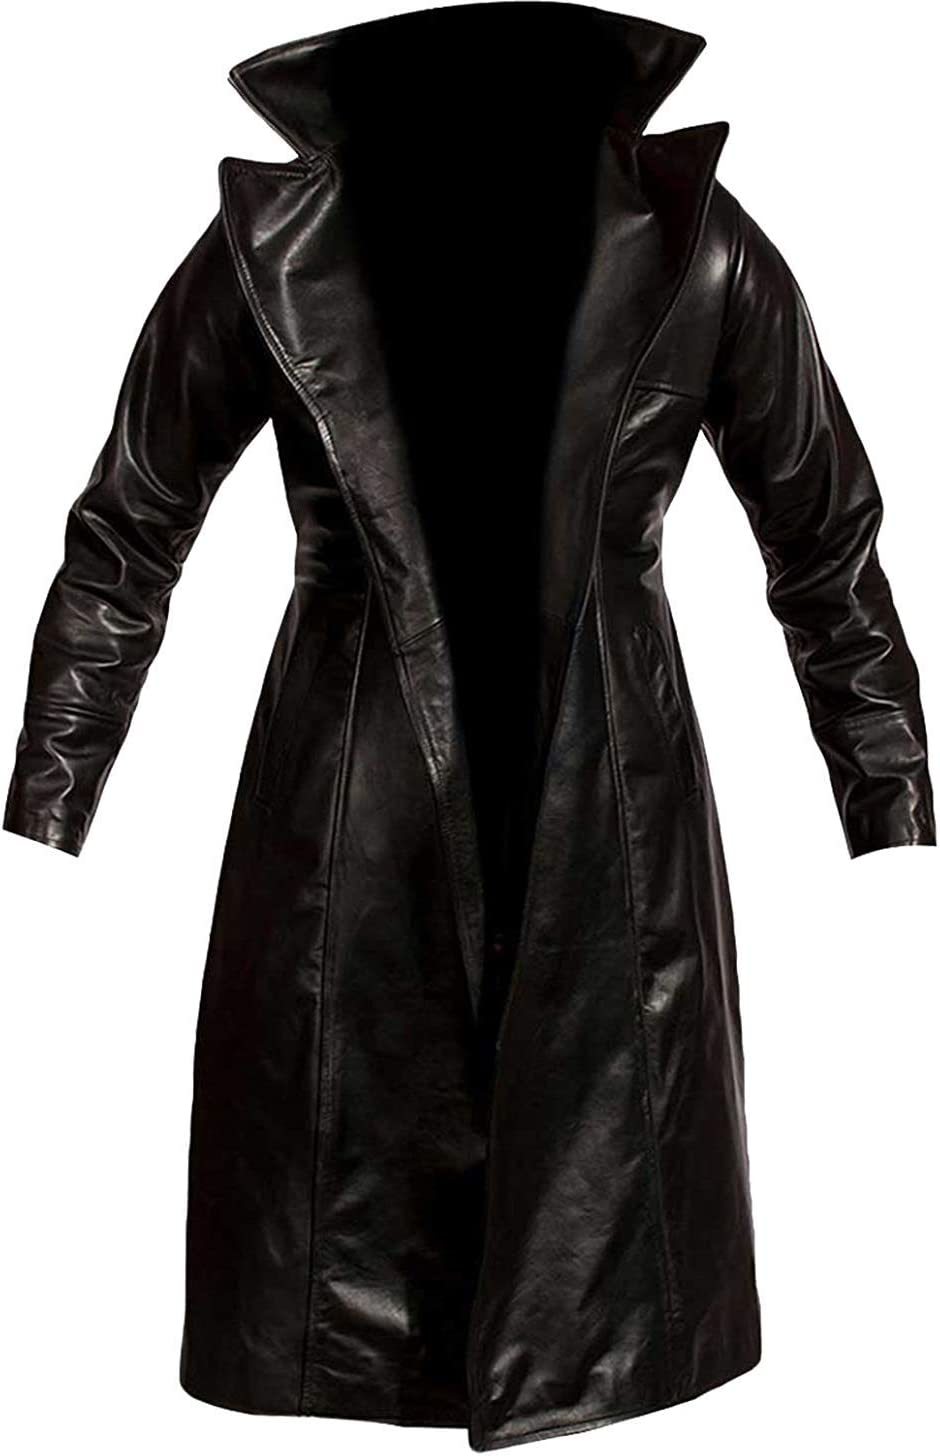 Primary image for Mens The Crow Brandon Lee Eric Draven Costume Black Leather Trench Coat